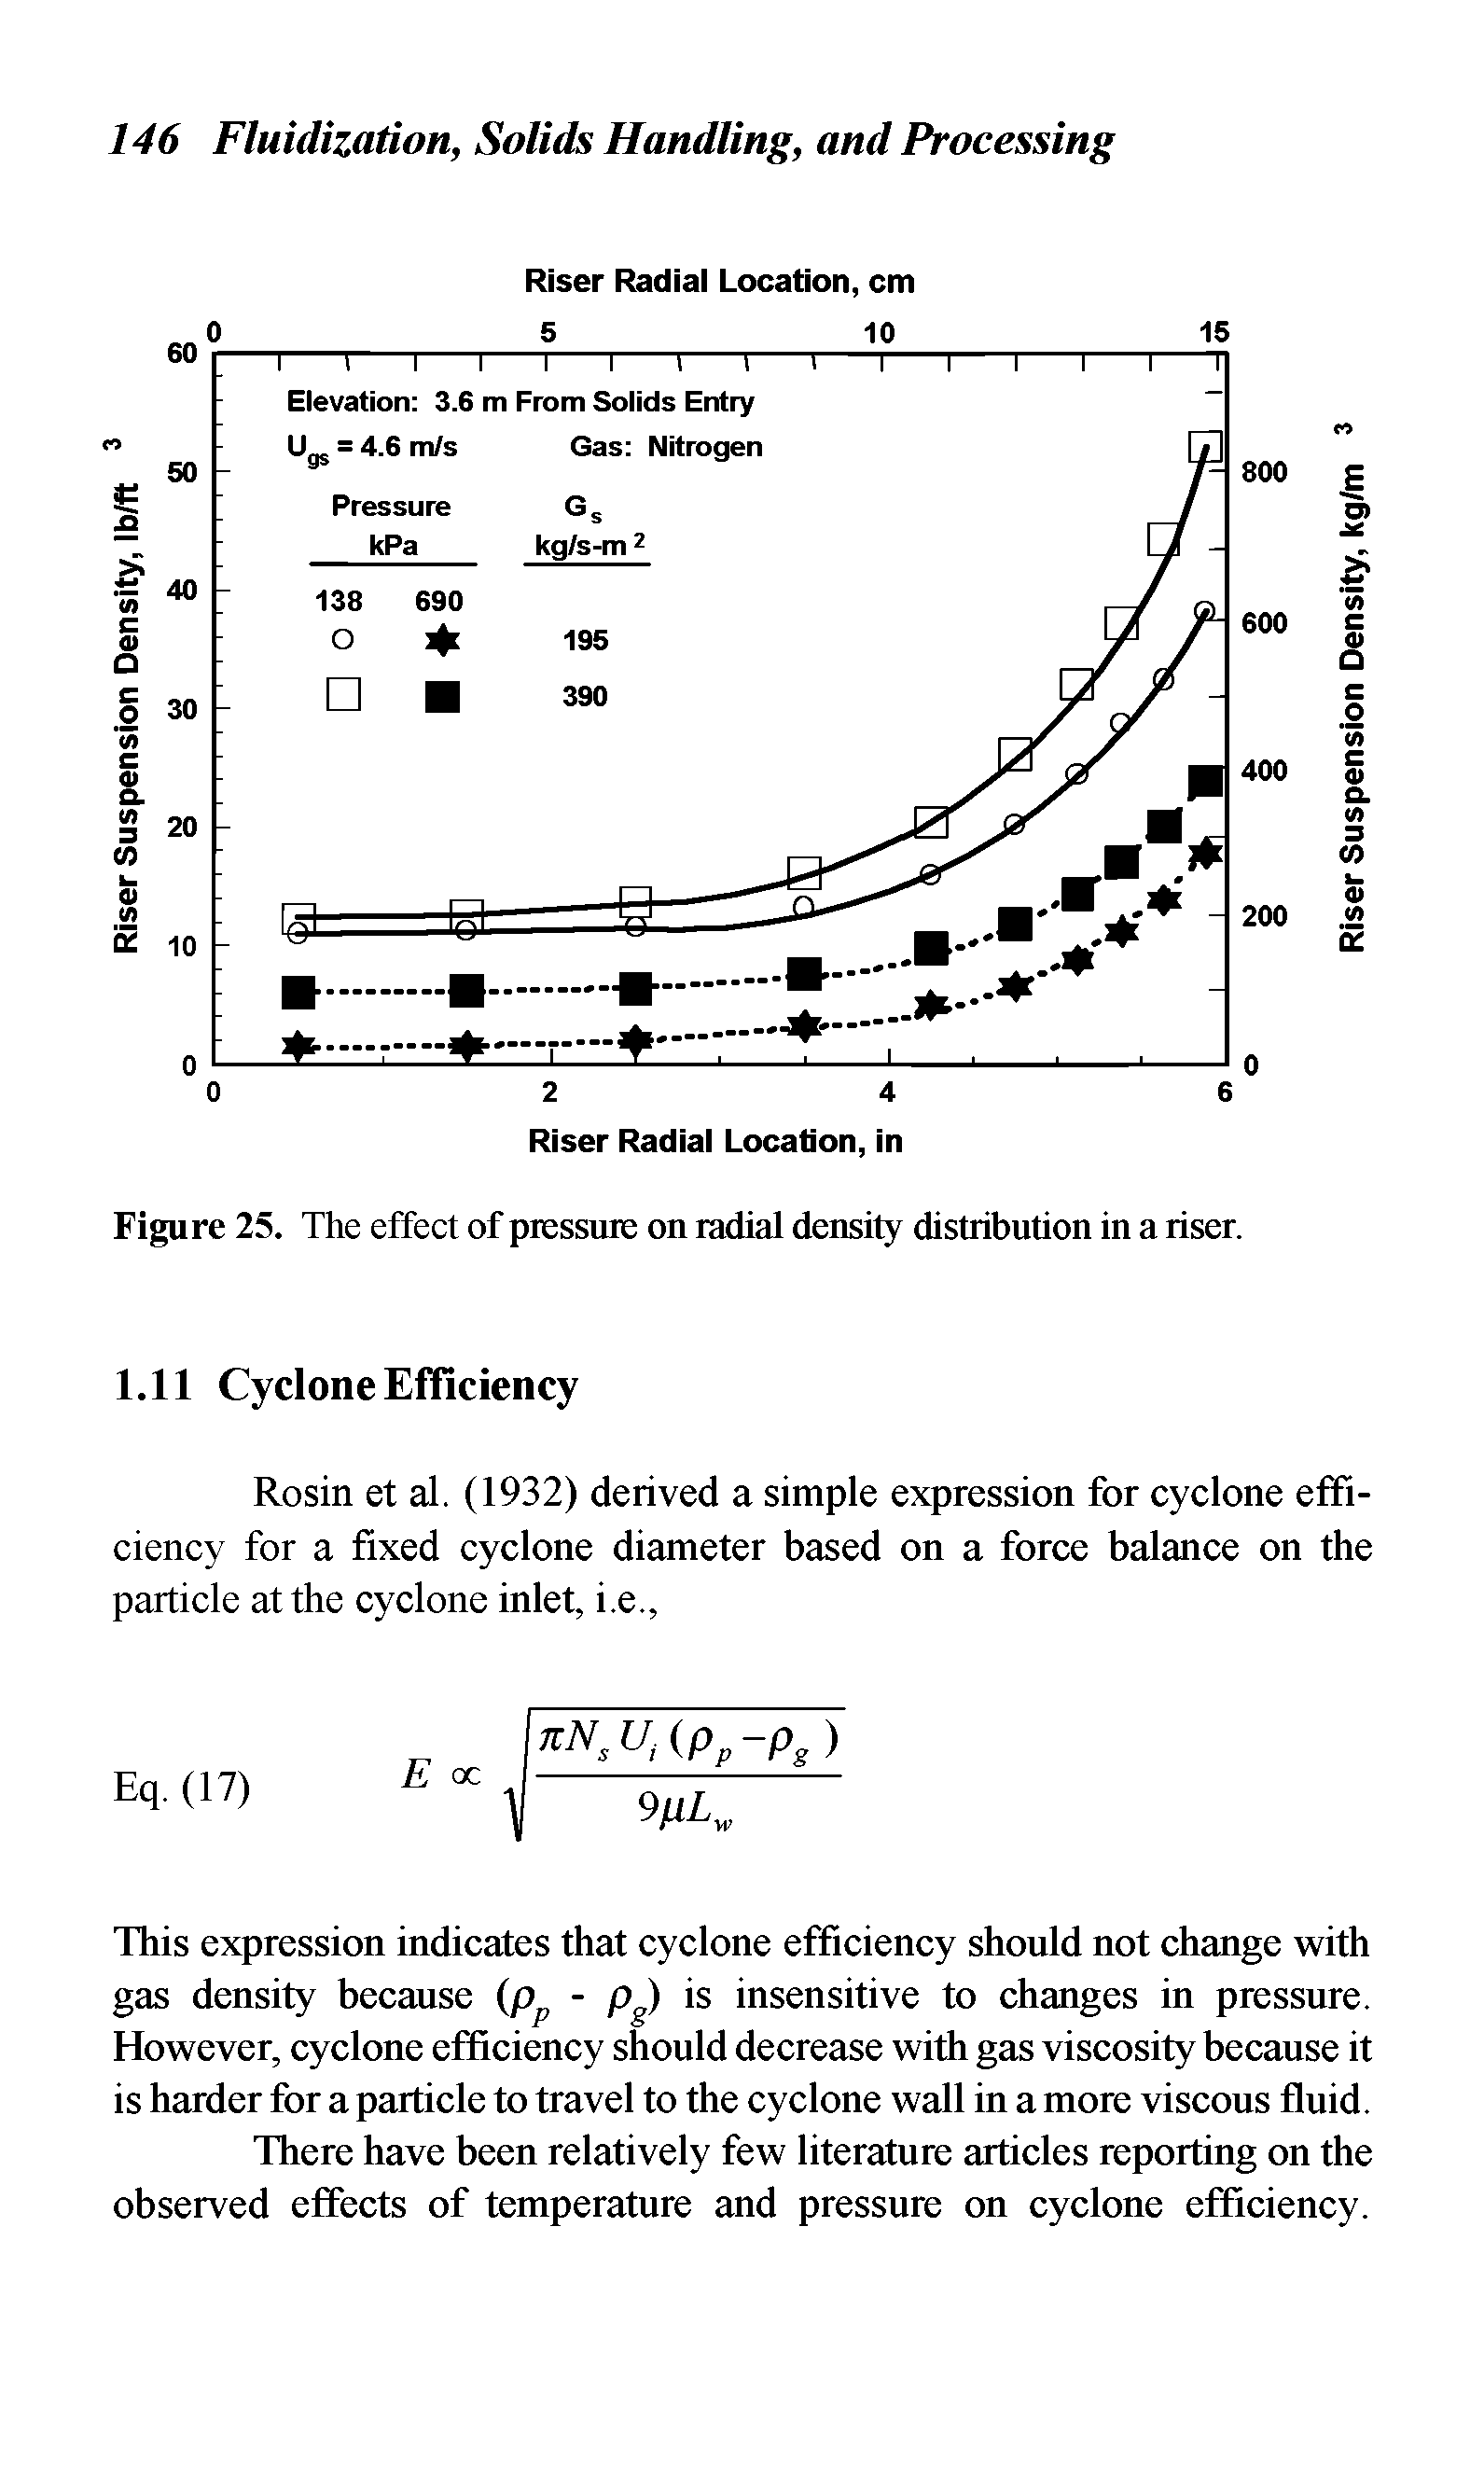 Figure 25. The effect of pressure on radial density distribution in a riser.